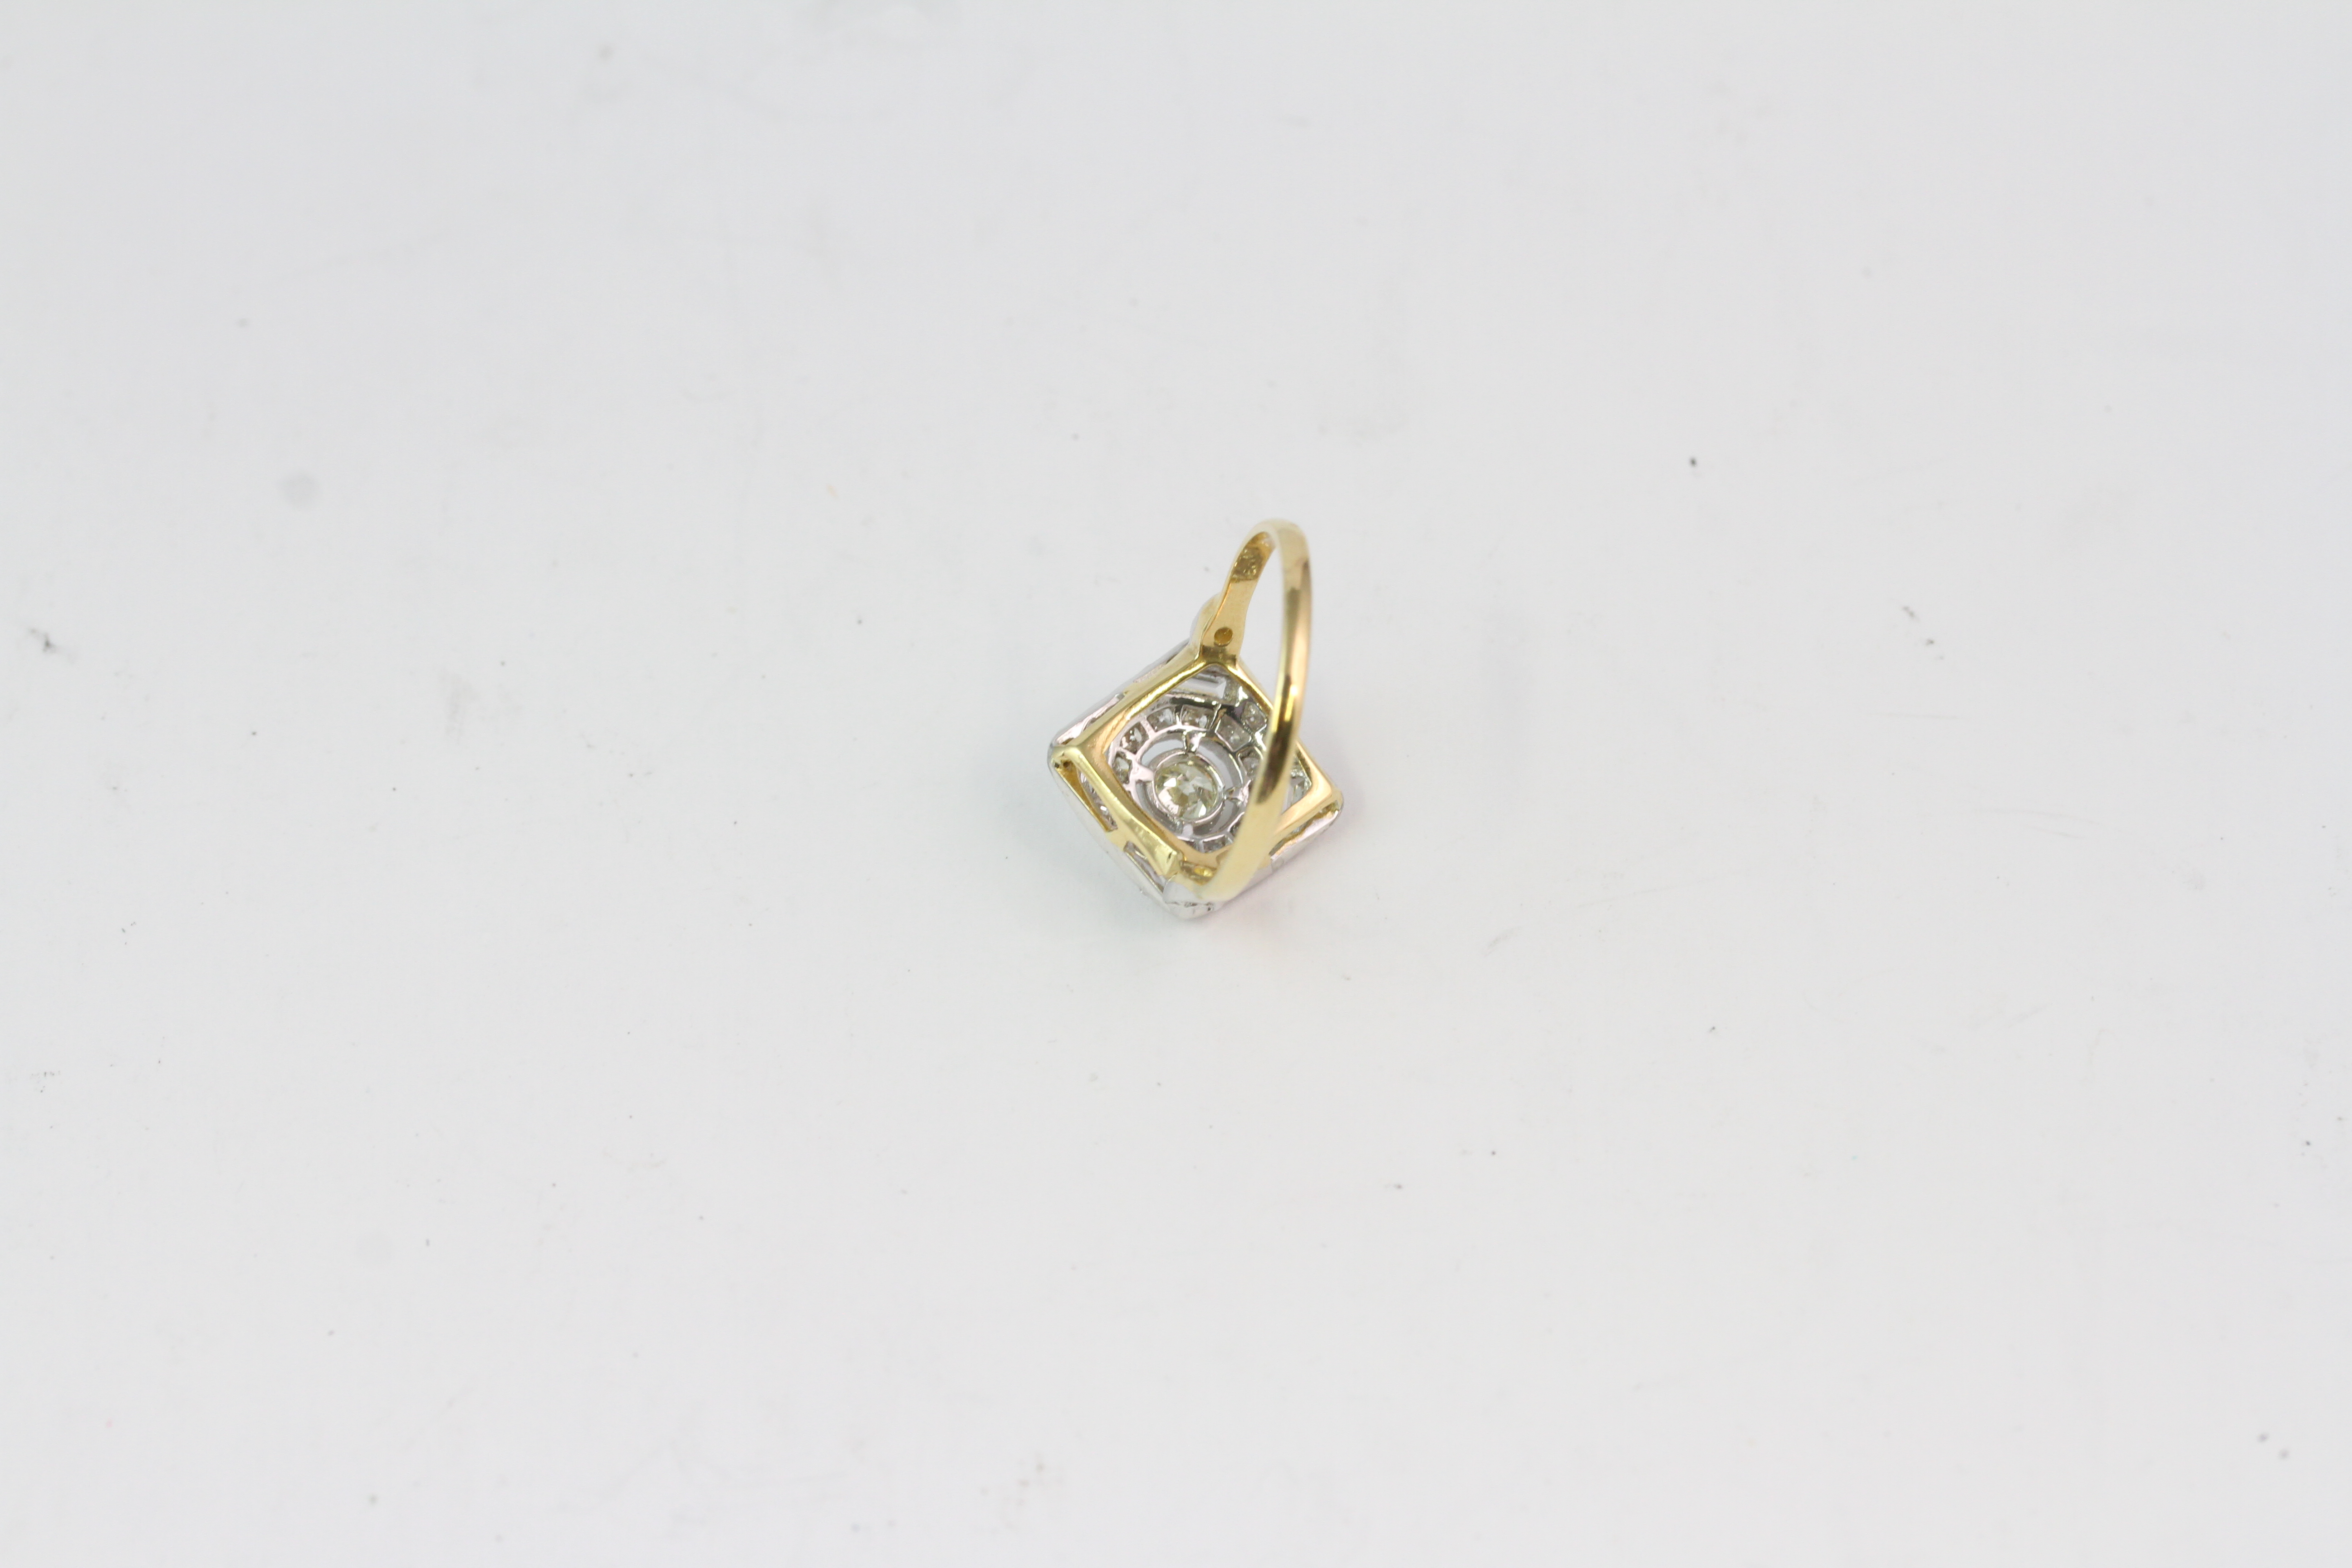 18YG tablet ring with 4 baguettes at compass points, centre diamond in a bezel TDW 1ct - Image 2 of 2